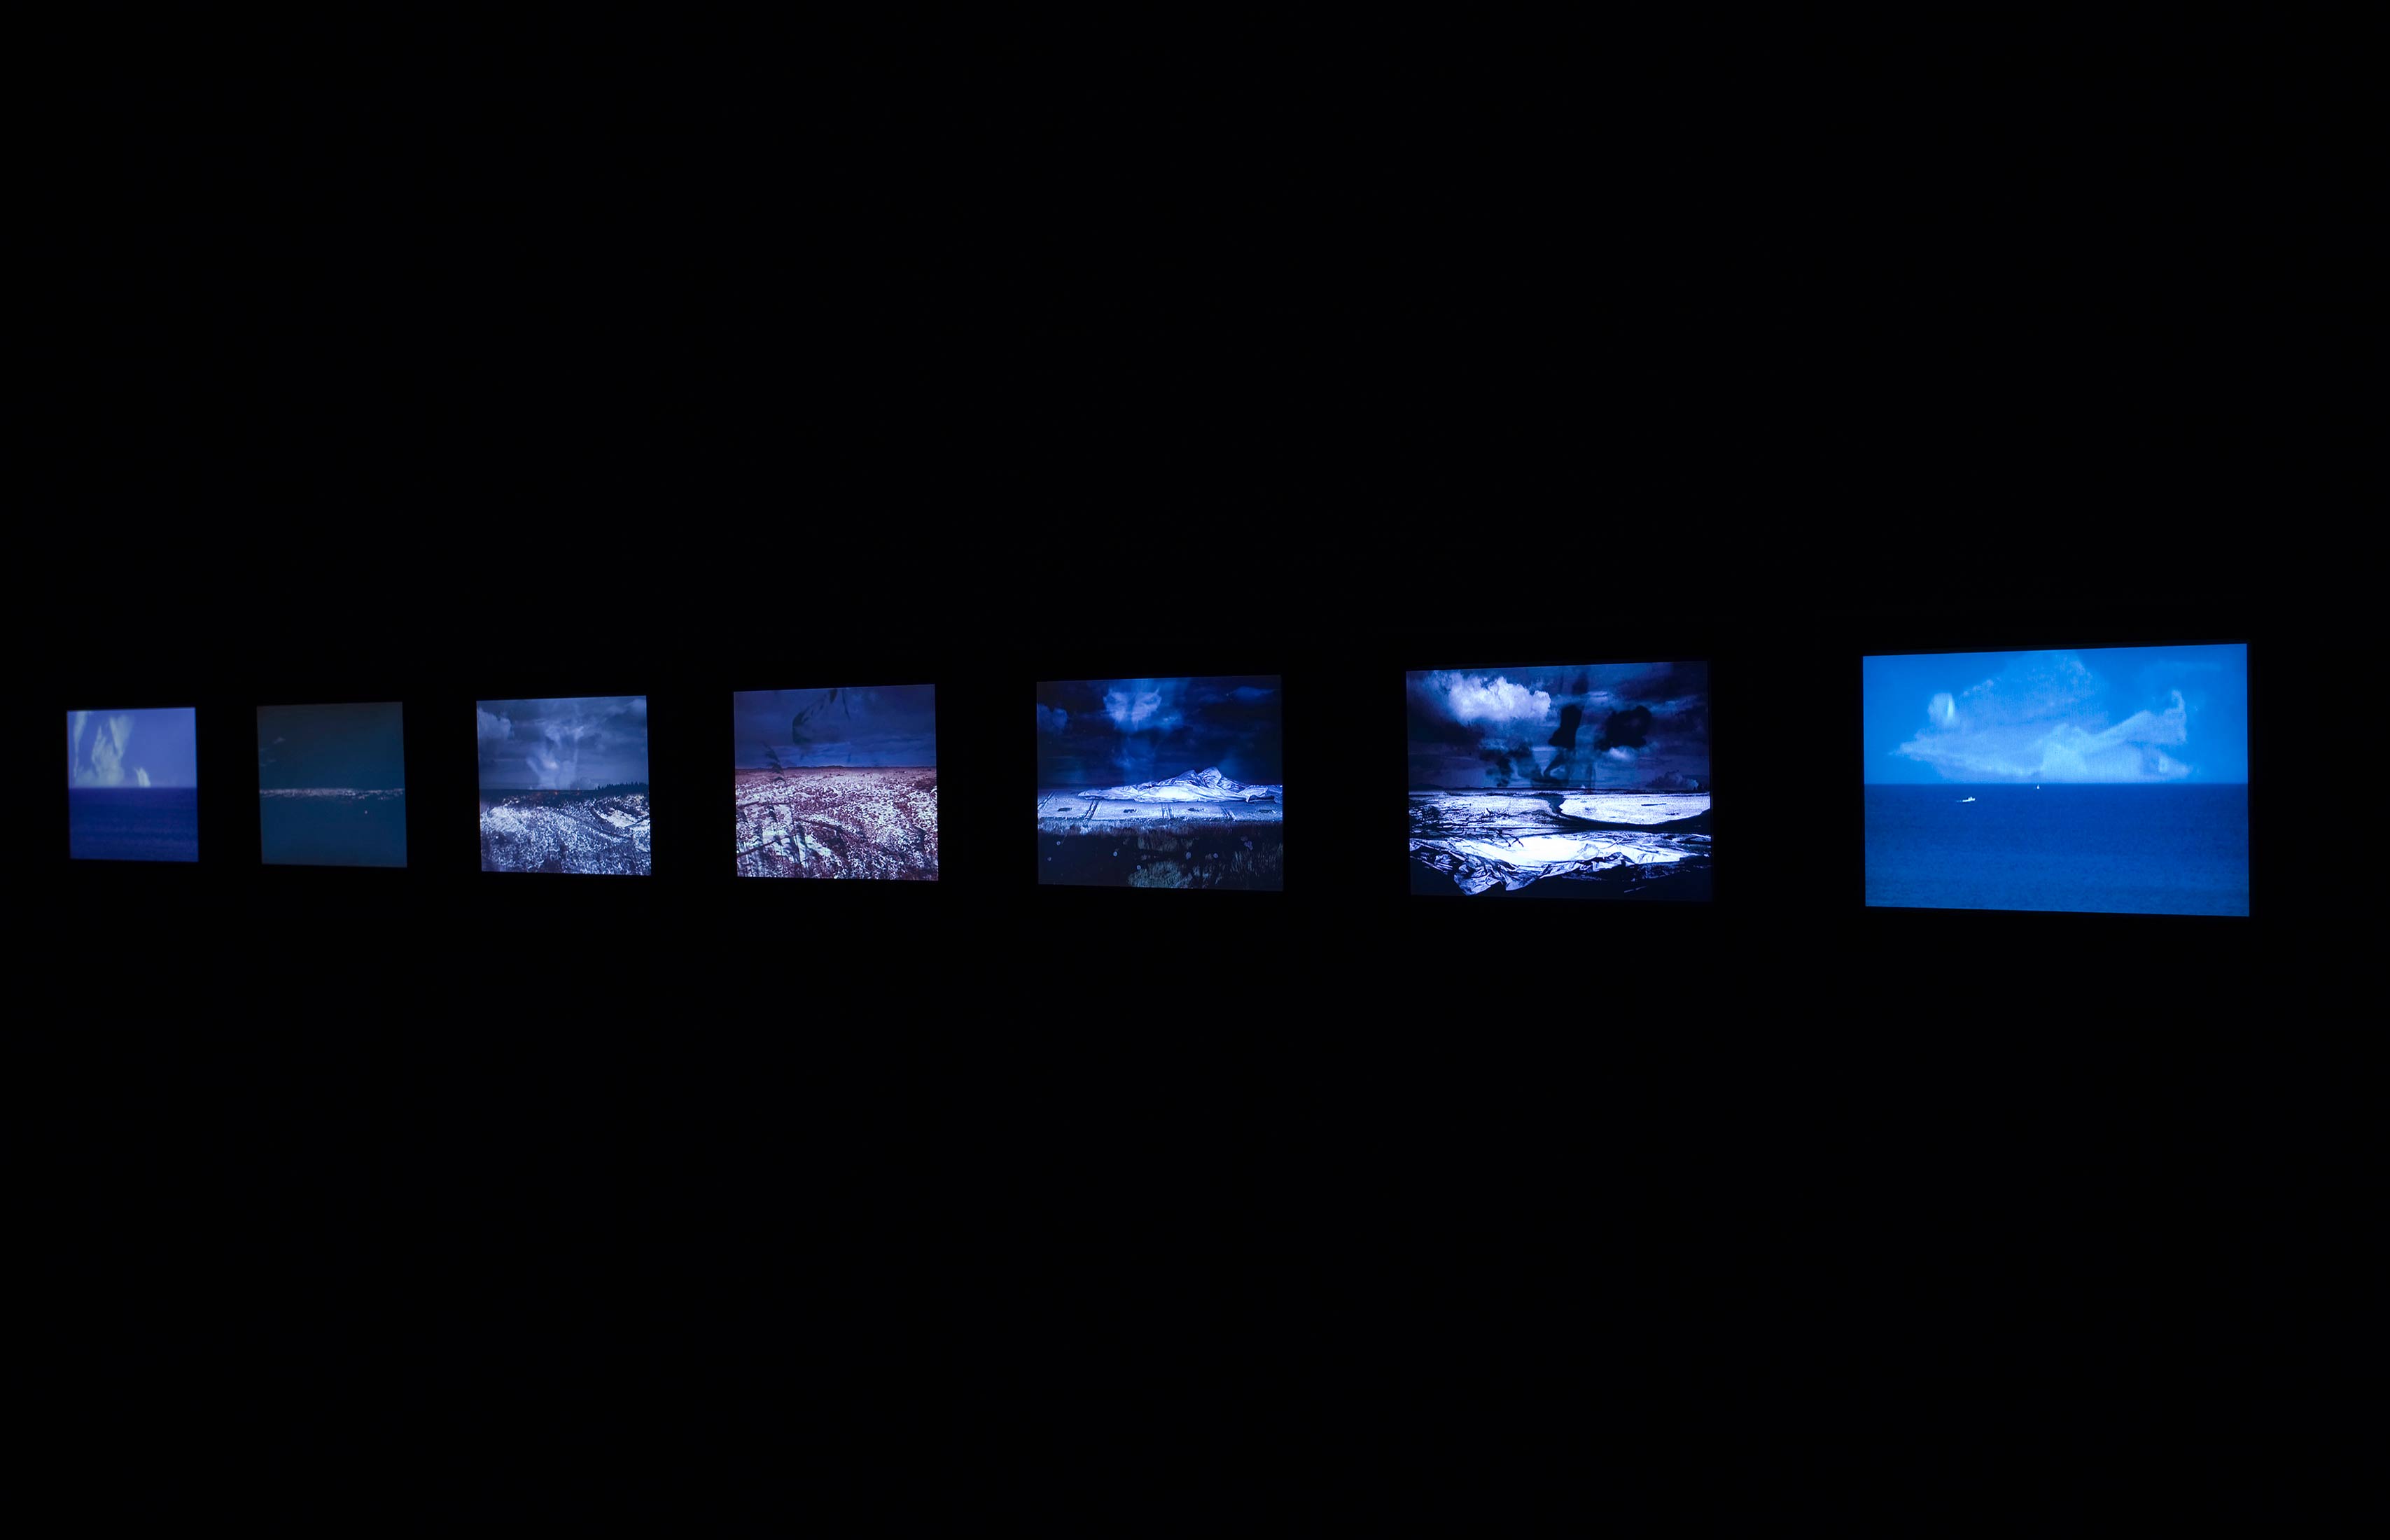 Ailbhe Ní Bhriain 'Palimpsest' seven screen installation, video, colour, silent, looped; installation view at The Butler Gallery, Kilkenny, Ireland, curated by Anna O'Sullivan, 2008, photography by Denis Mortell.